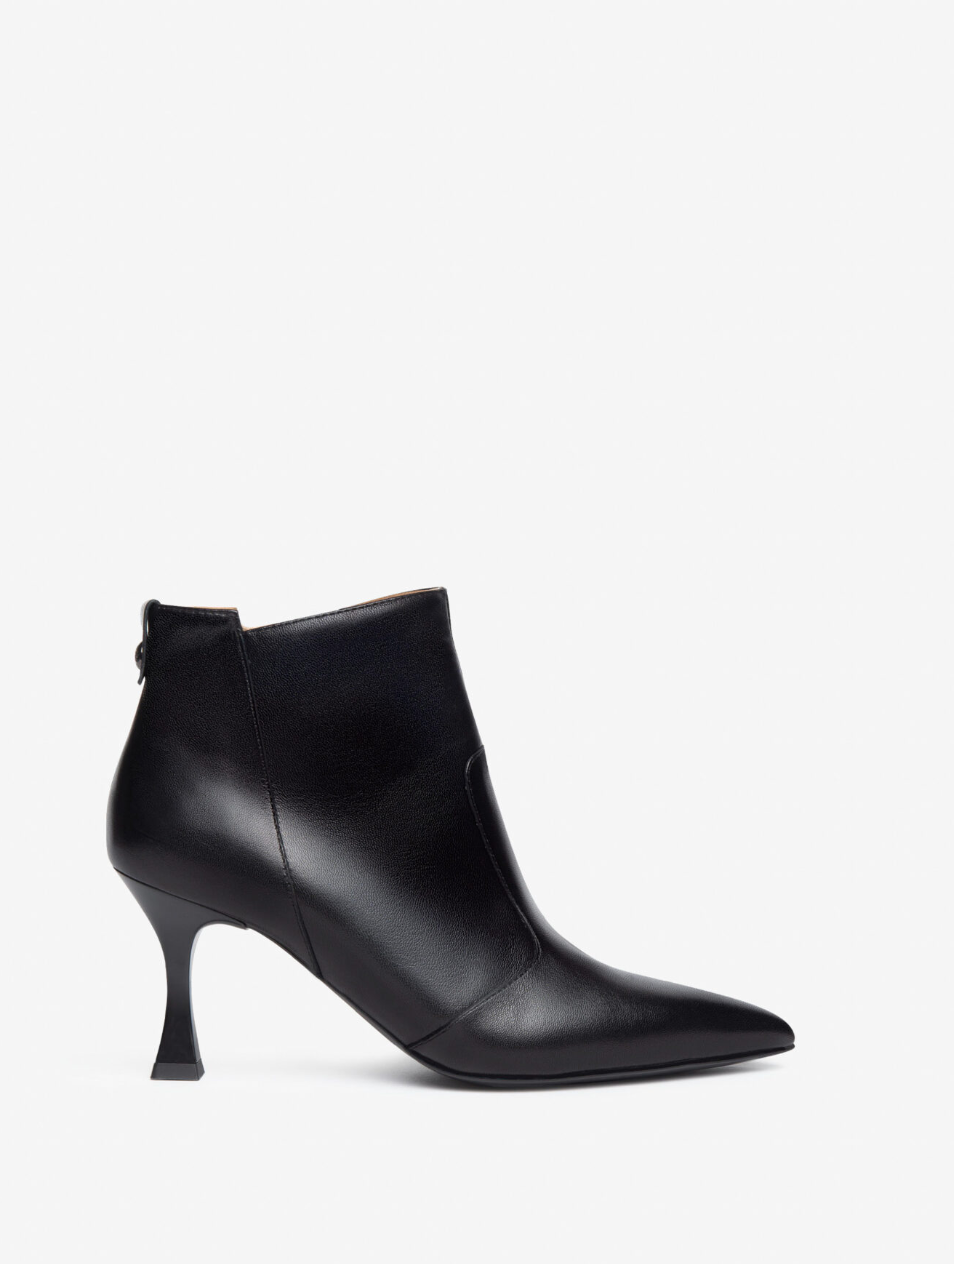 Black Leather Heeled Ankle Boot